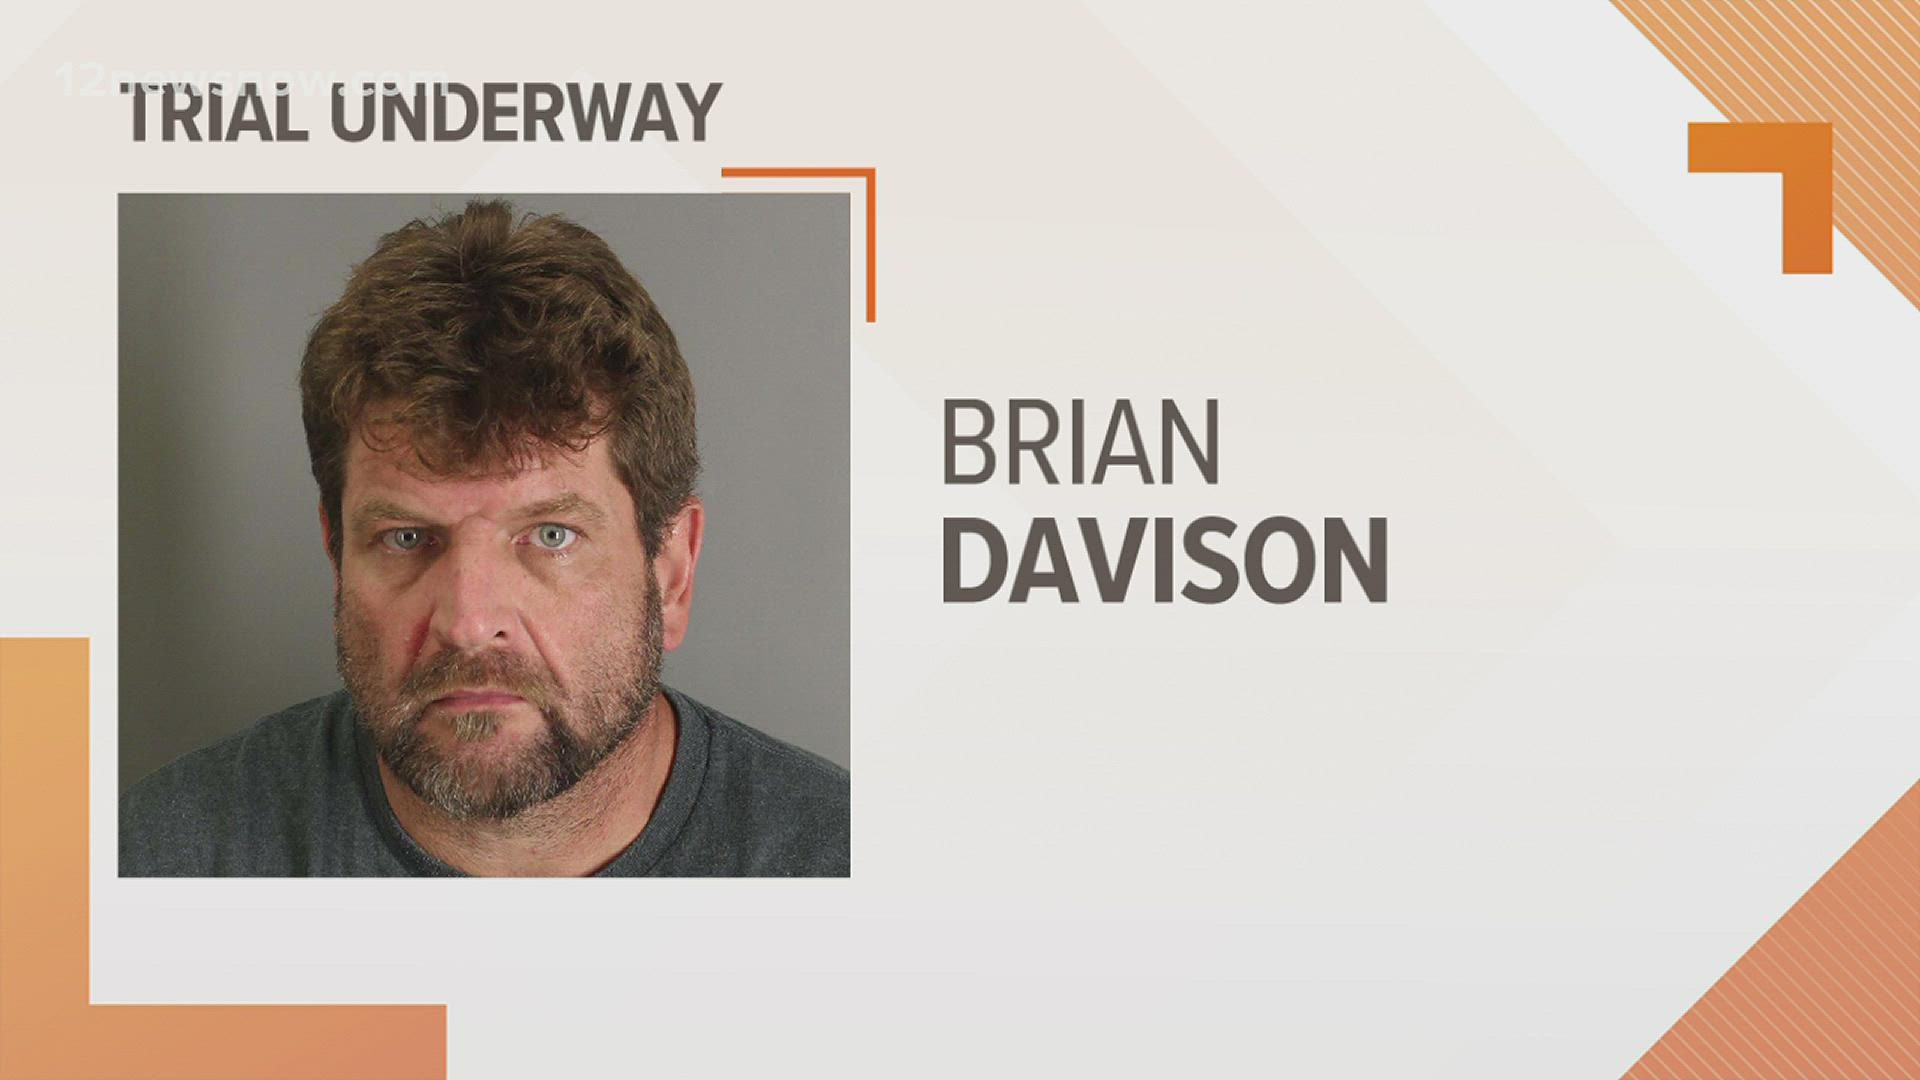 Brian Davison was indicted in November of 2018.